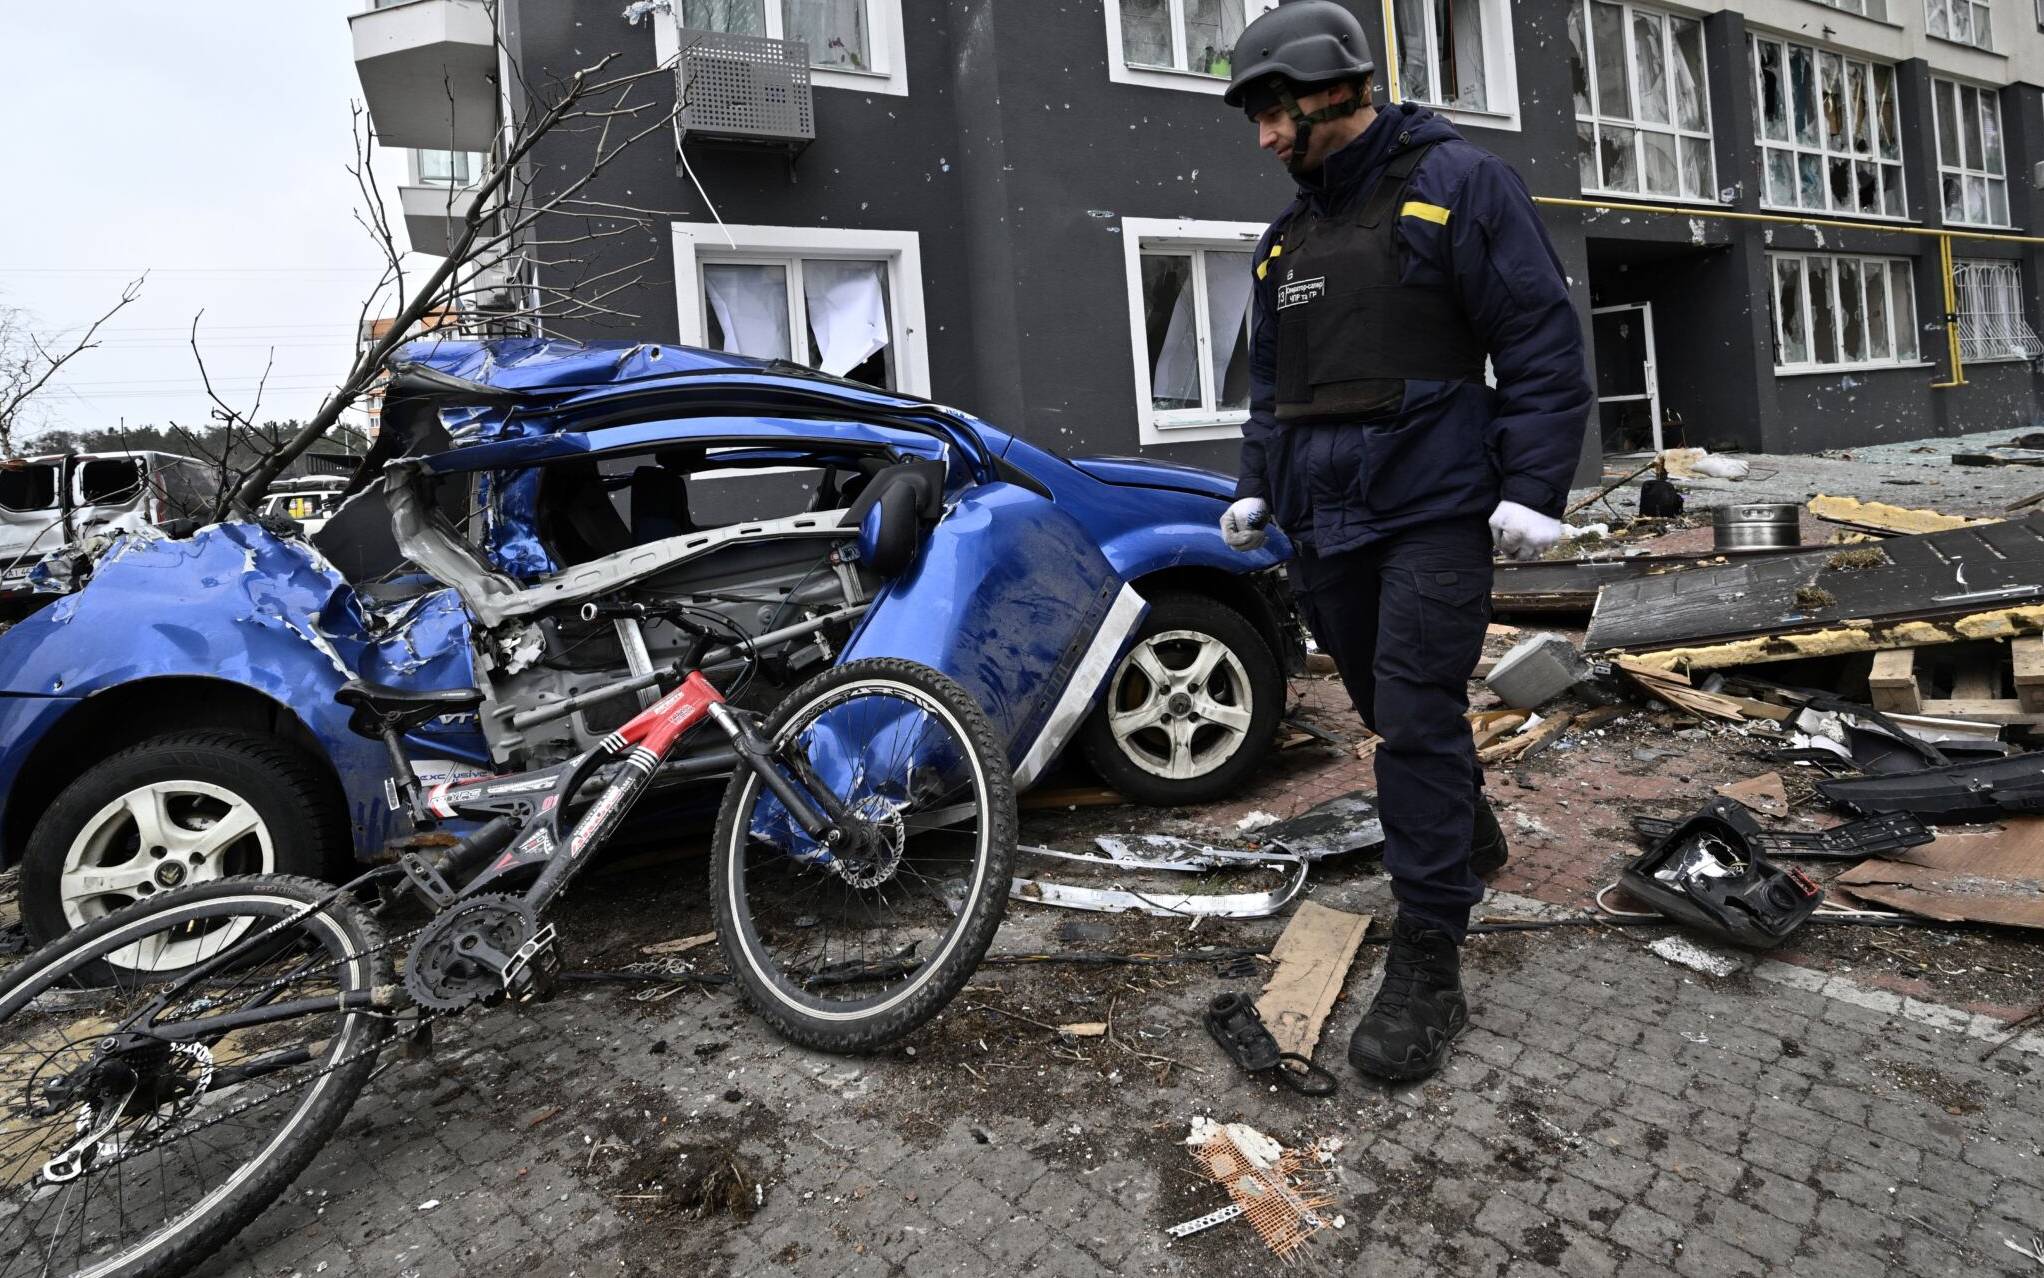 A field engineer of the State Emergency Service of Ukraine checks a damaged residential area in Bucha on April 5, 2022, as Ukrainian officials say over 400 civilian bodies have been recovered from the wider Kyiv region, many of which were buried in mass graves. - Bucha had been occupied by Russian troops, but when they withdrew recently Ukrainian authorities and independent international journalists including AFP found bodies of people in civilian clothing, some with their hands tied behind their backs. (Photo by Genya SAVILOV / AFP)